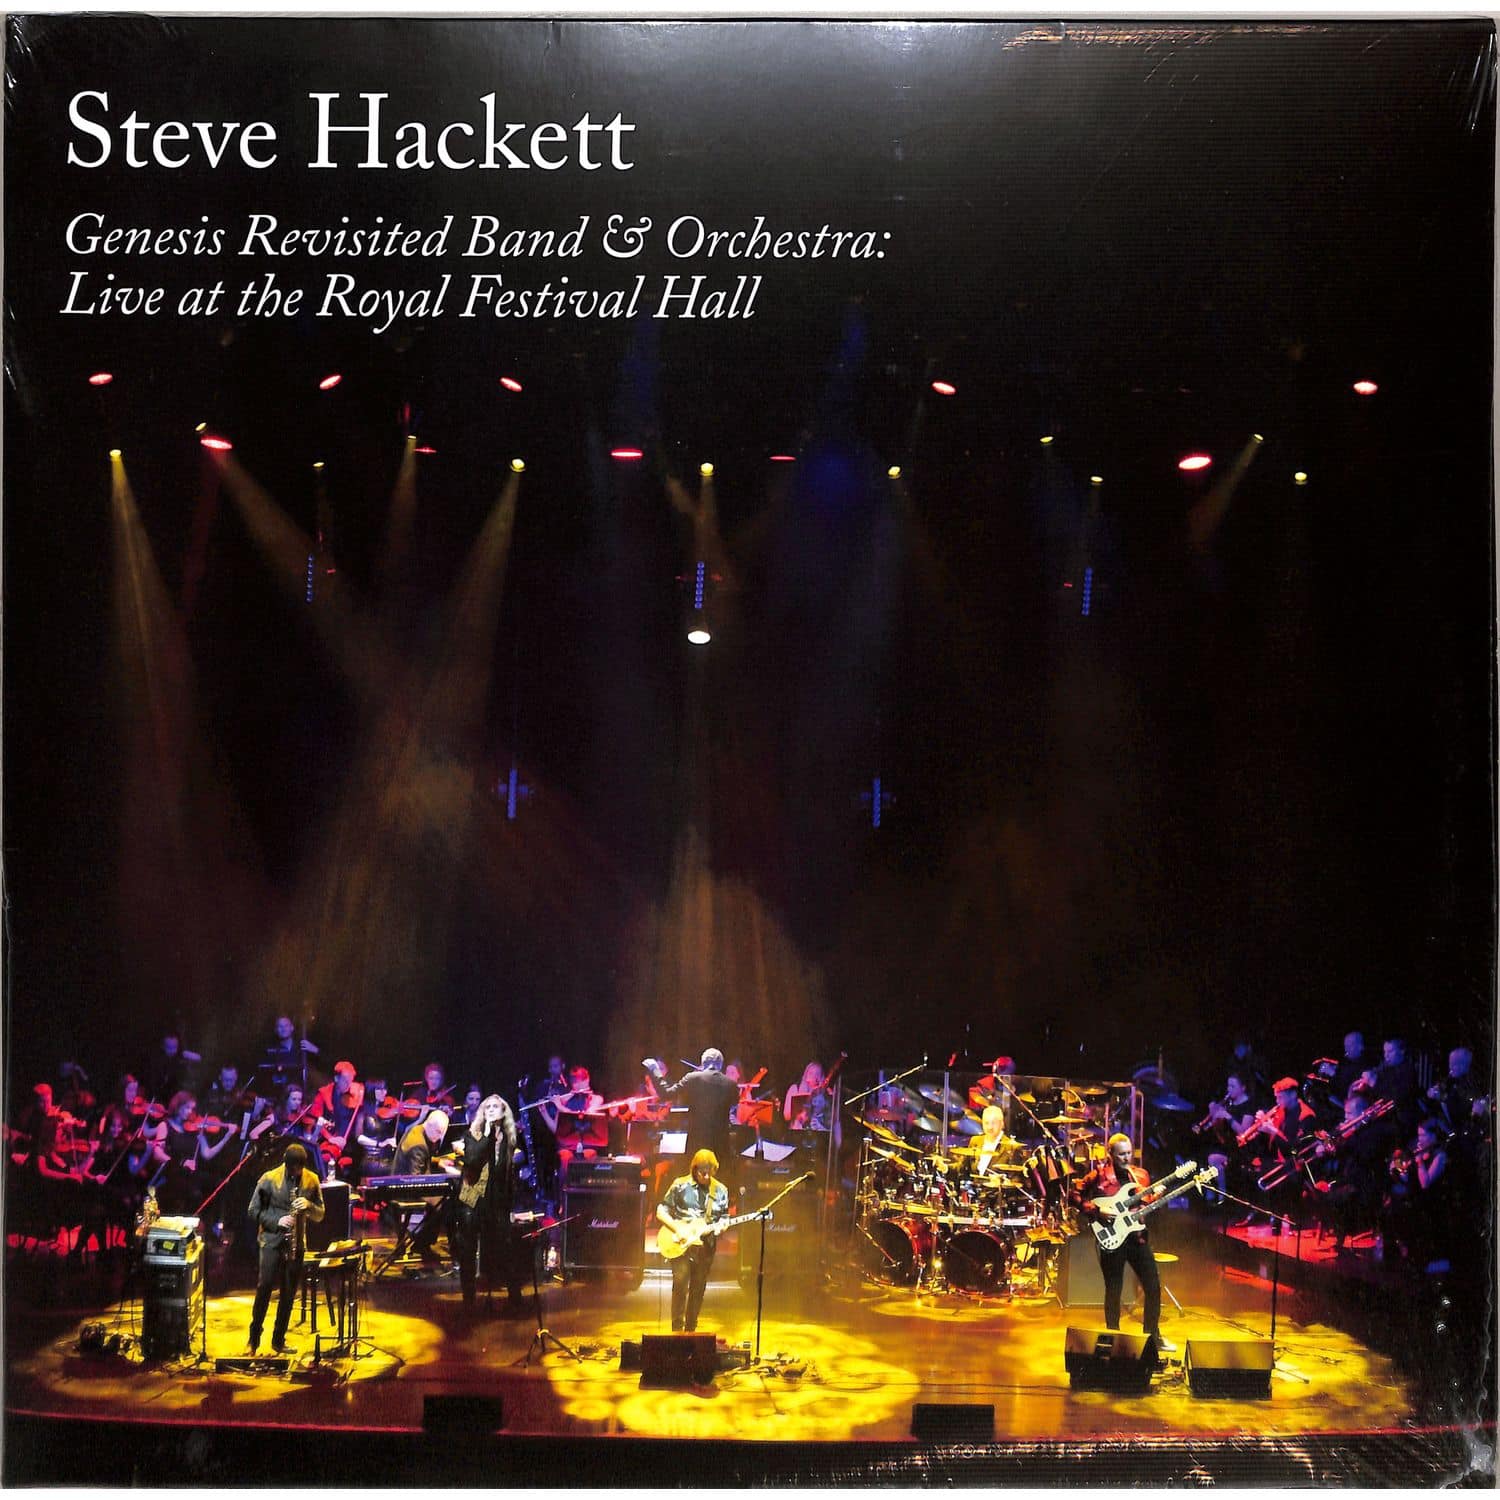 Steve Hackett - GENESIS REVISITED BAND & ORCHESTRA: LIVE 